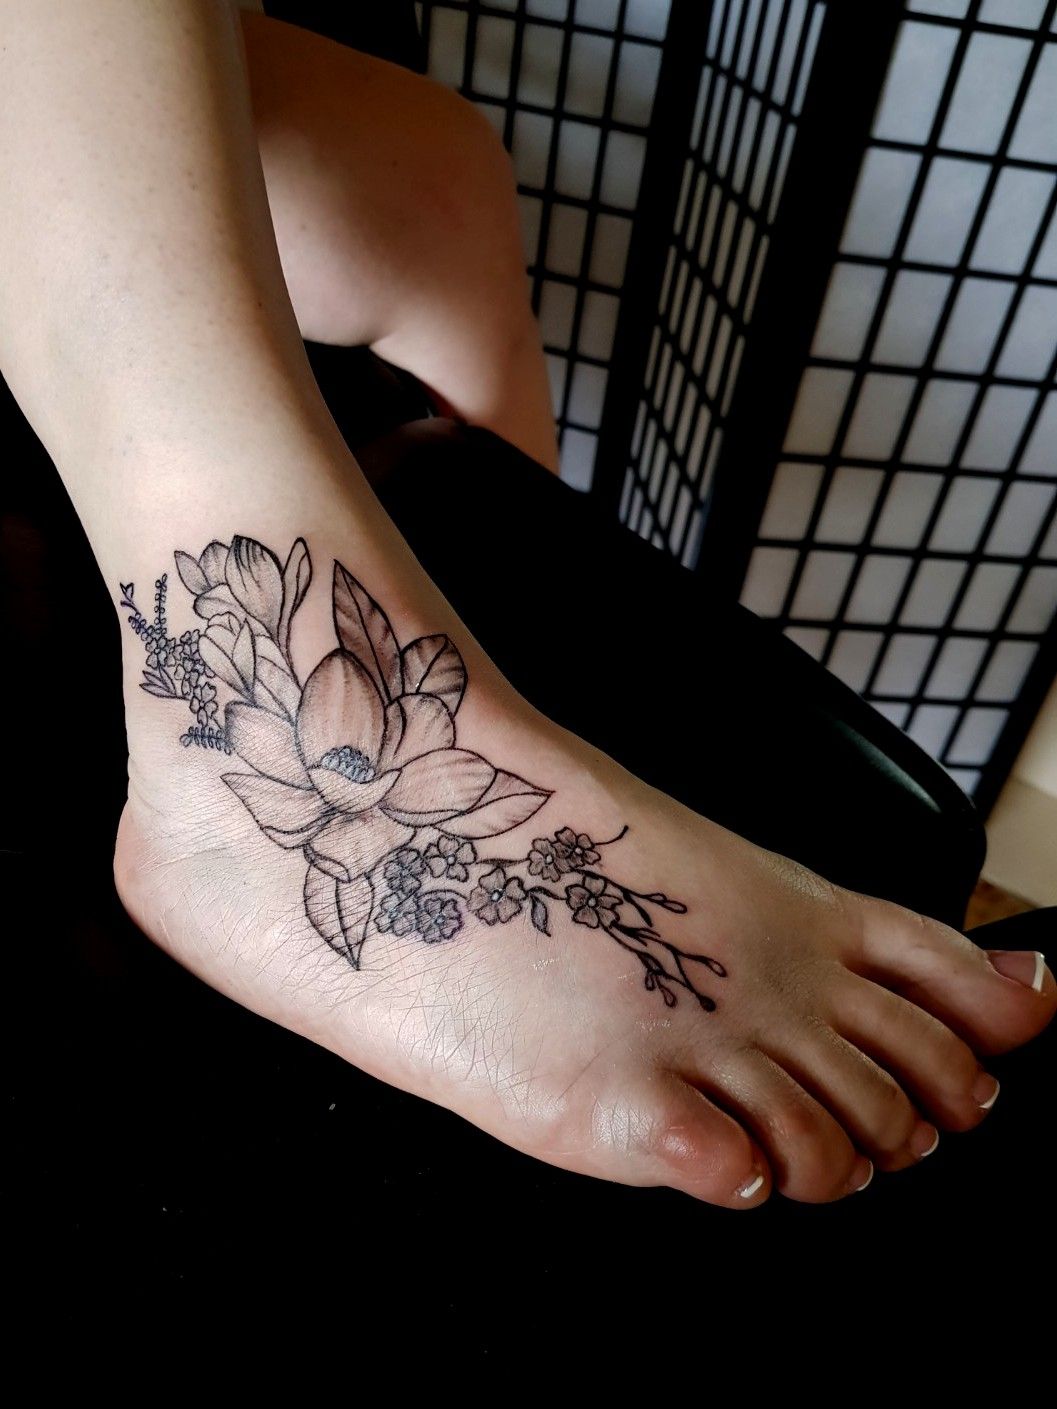 101 Best Foot Tattoo Ideas You Have To See To Believe!